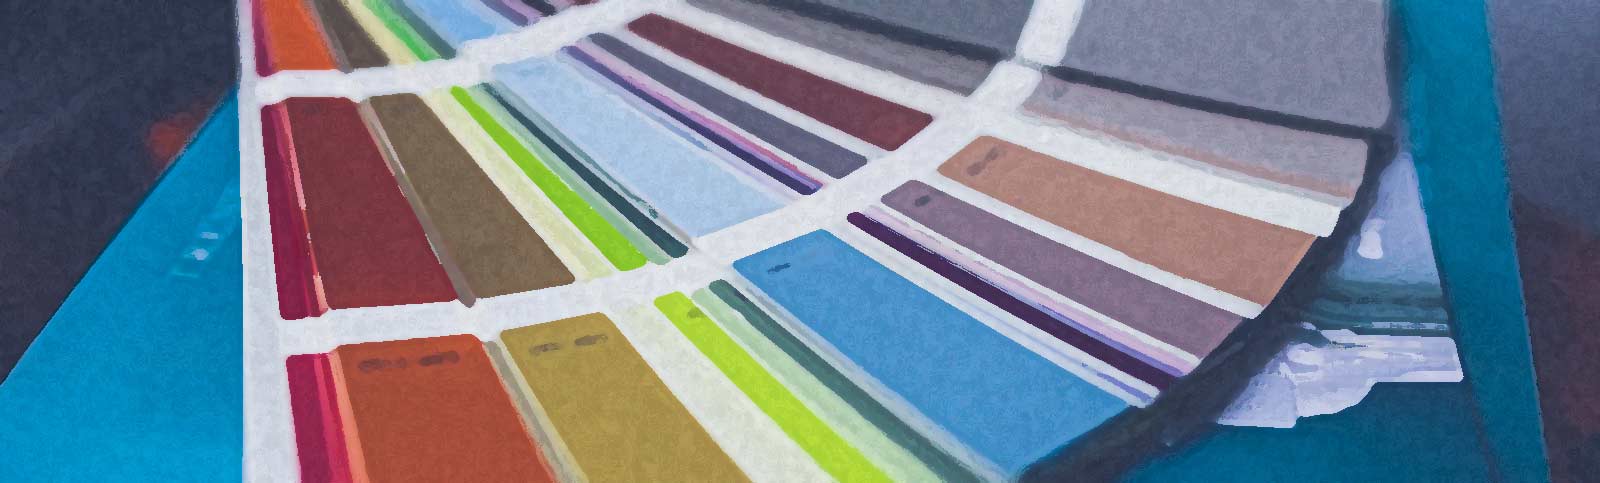 Planning a Colour Scheme for Your Home